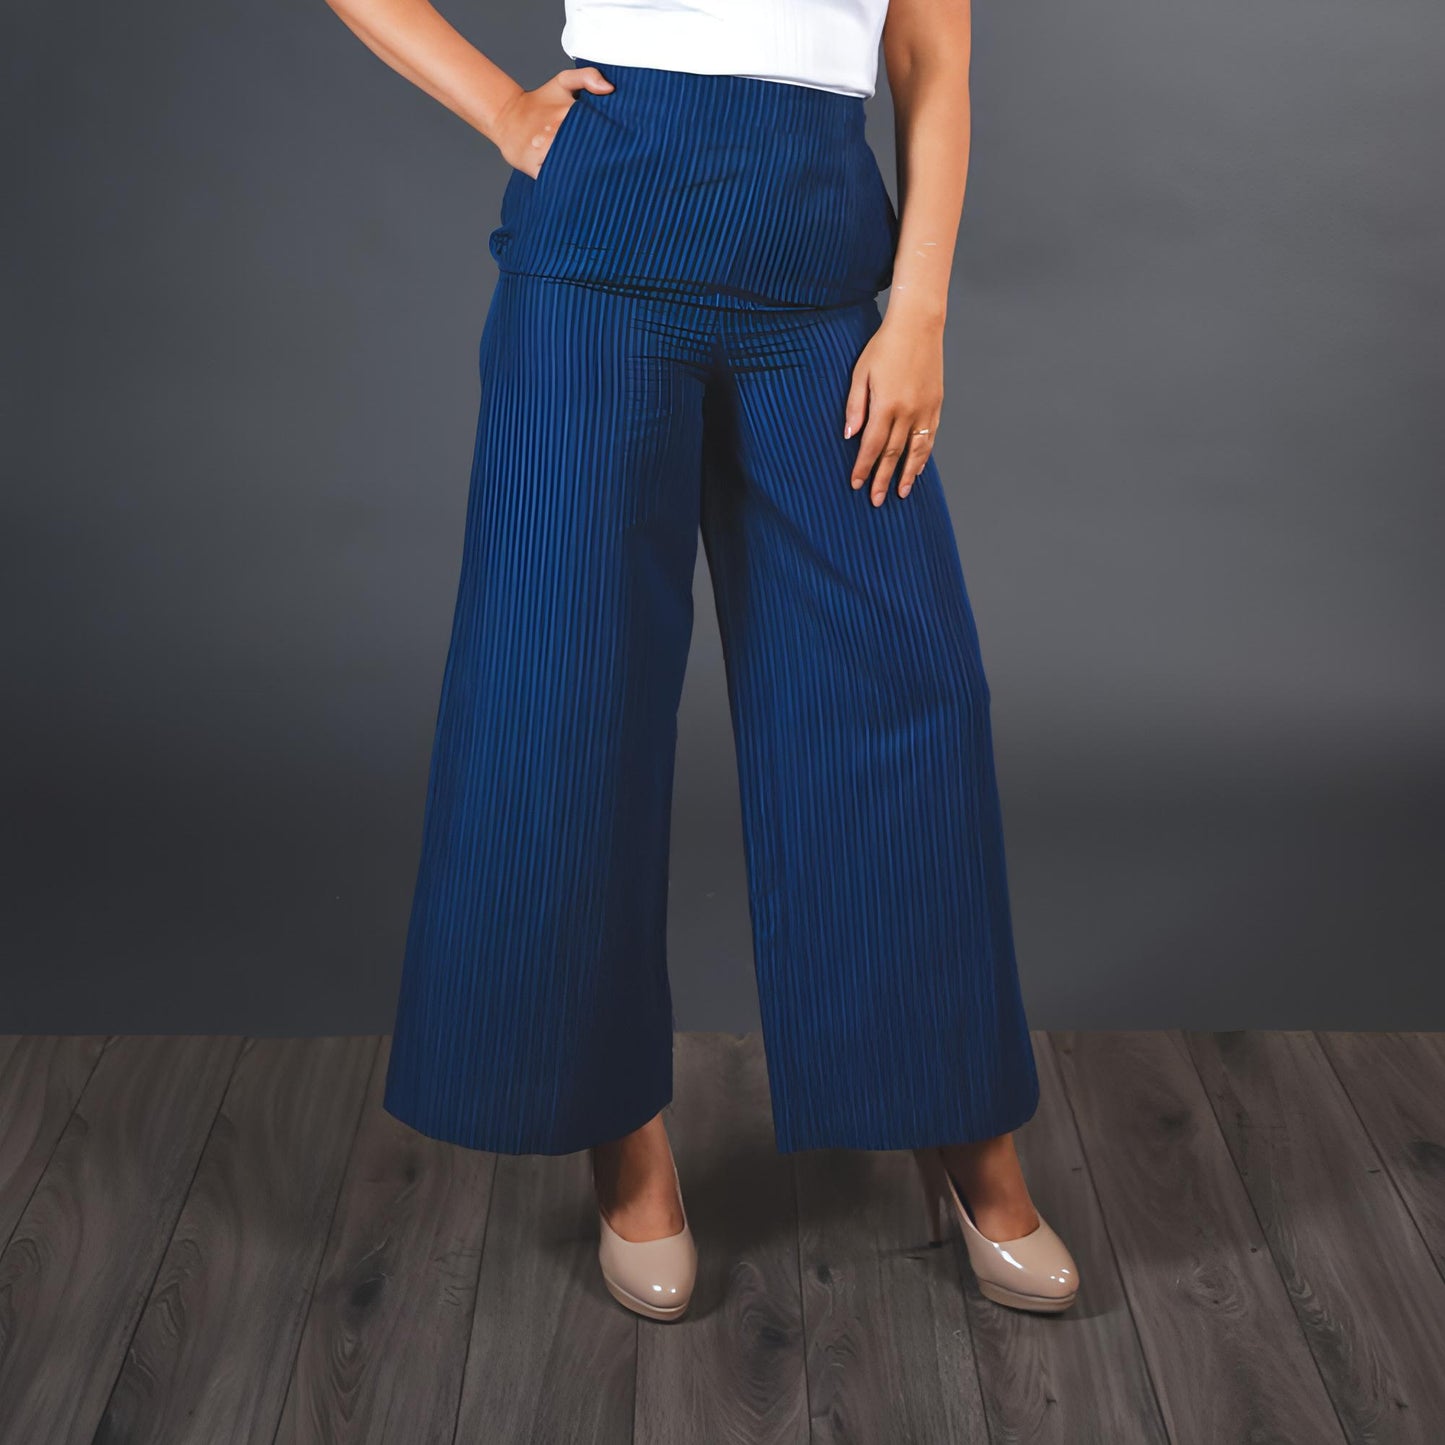 Sewing Pattern - The Sienna Palazzo Trouser by The Pattern Preacher